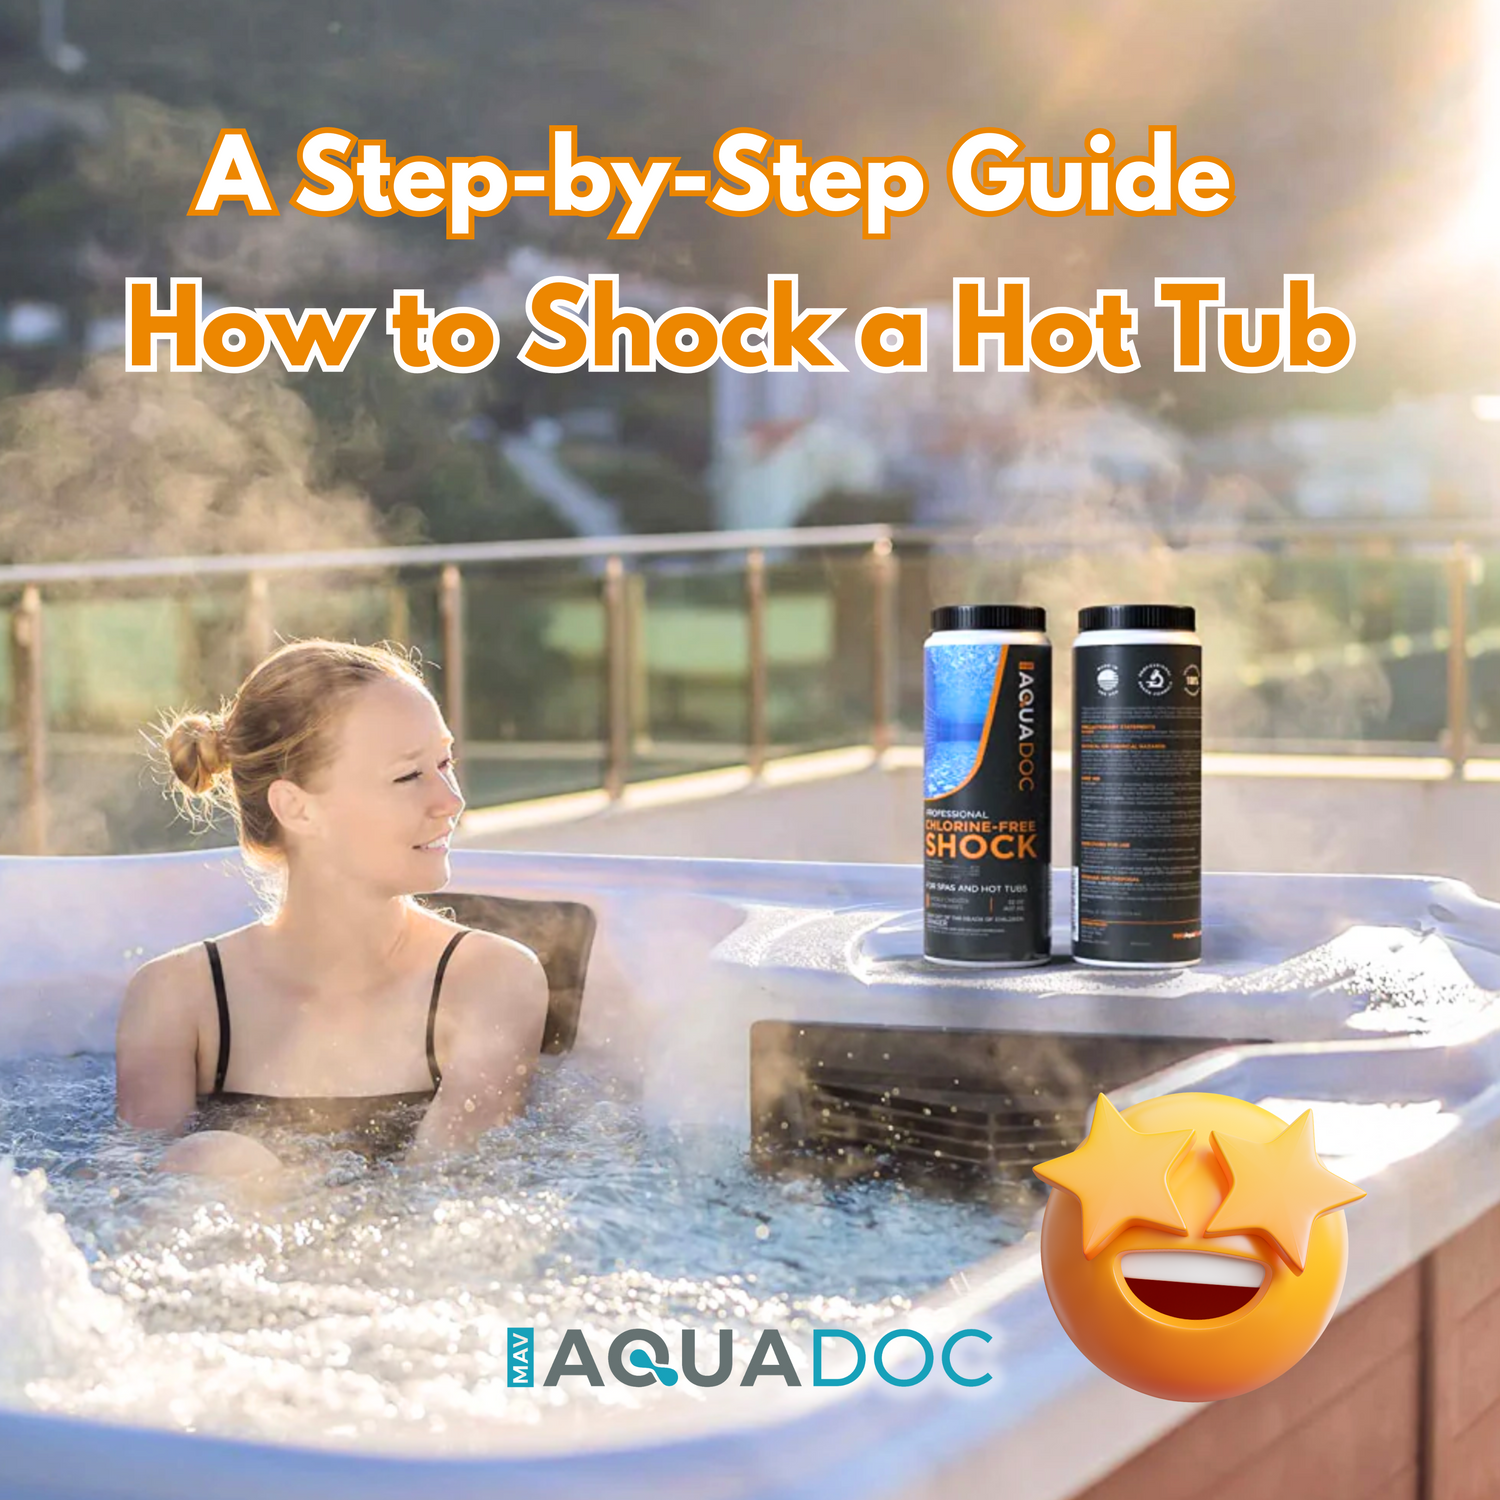 Shock Therapy: A Step-by-Step Guide How to Shock a Hot Tub